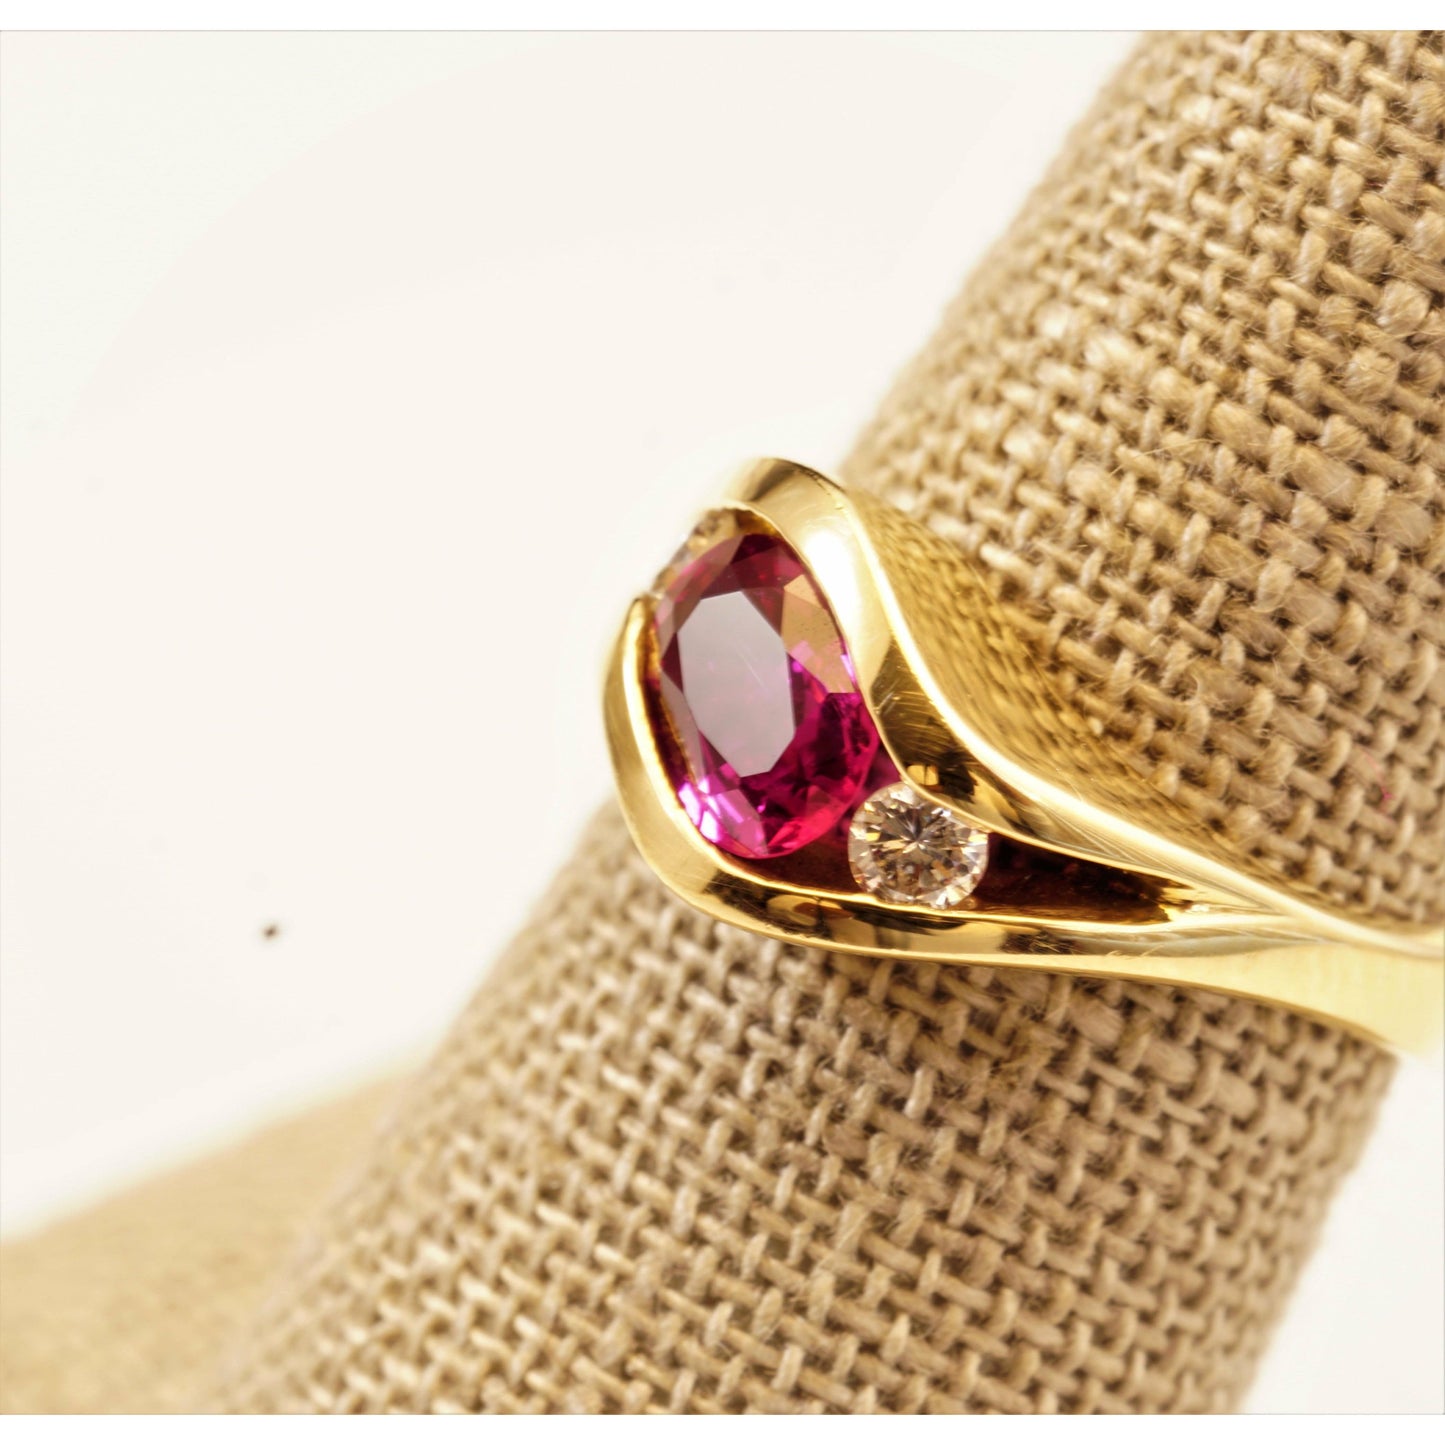 FJL Jewelry Rings Stunning three-stone ruby ring, A-grade quality oval ruby boasts a translucent medium red hue and weighs 1.30 carats